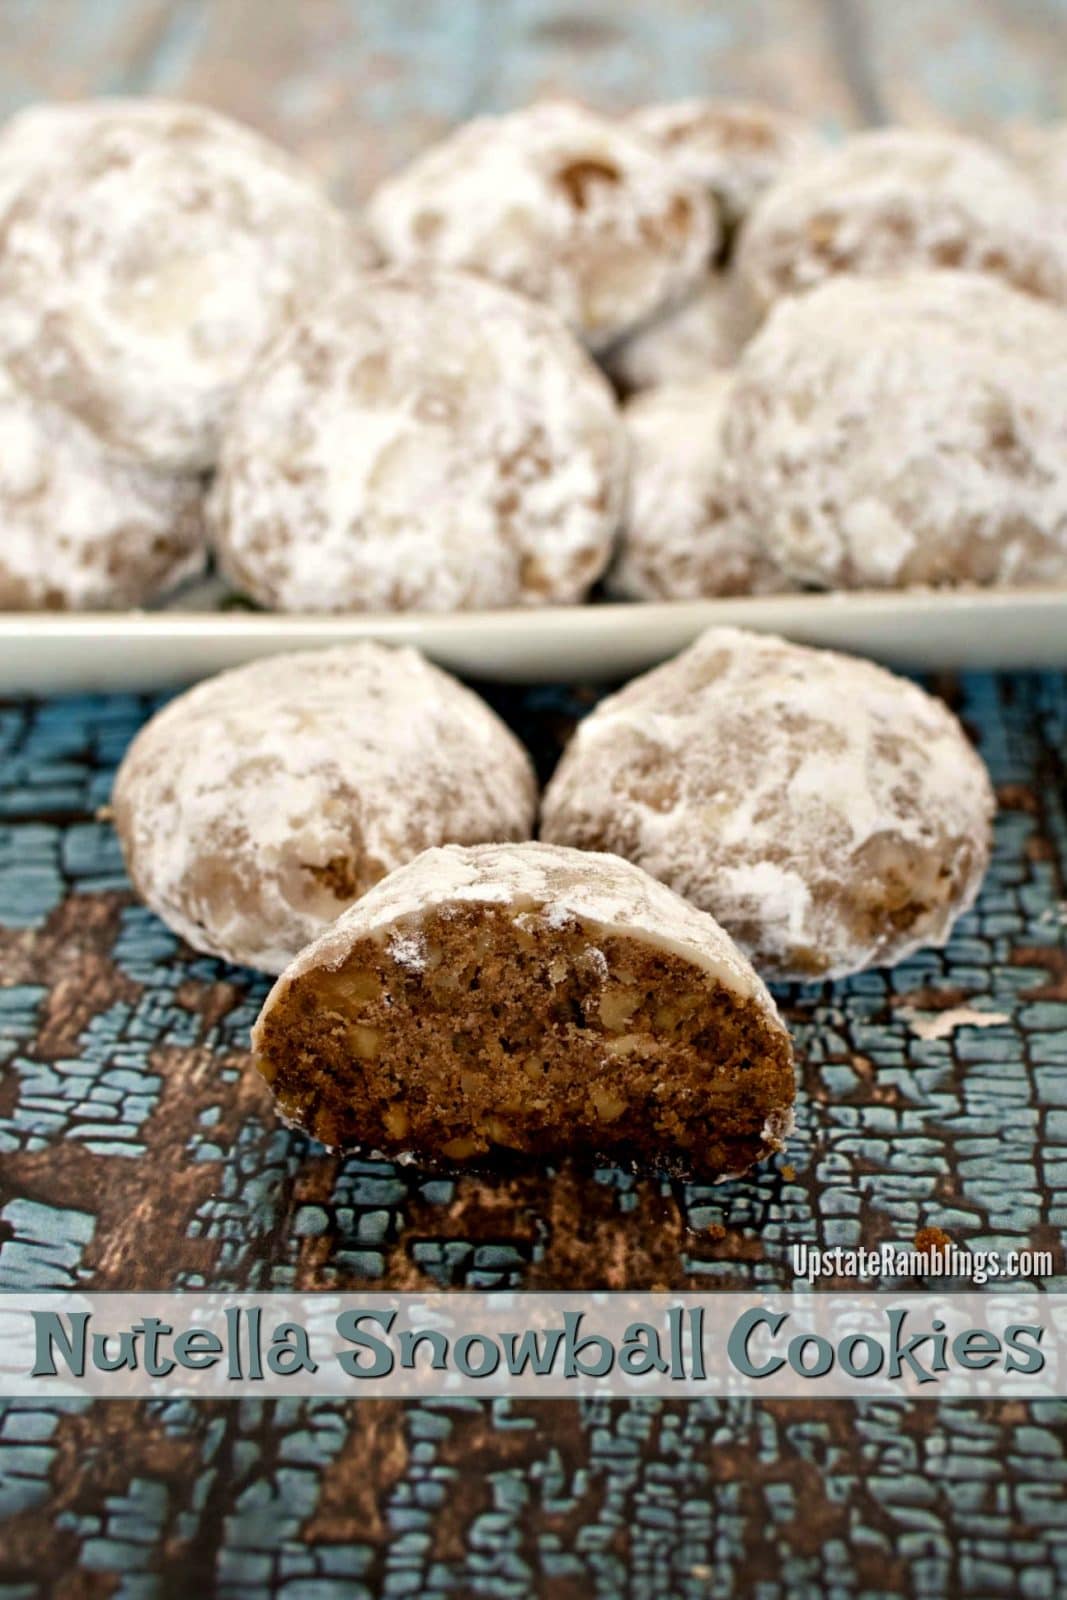 Russian Tea Cakes (Snowball cookies or Mexican Wedding Cake cookies) are a crumbly and buttery winter treat & a yummy Christmas cookie! Fun to make and eat - Nutella and walnuts mixed and coated in powdered sugar #cookies #christmascookies #snowballs